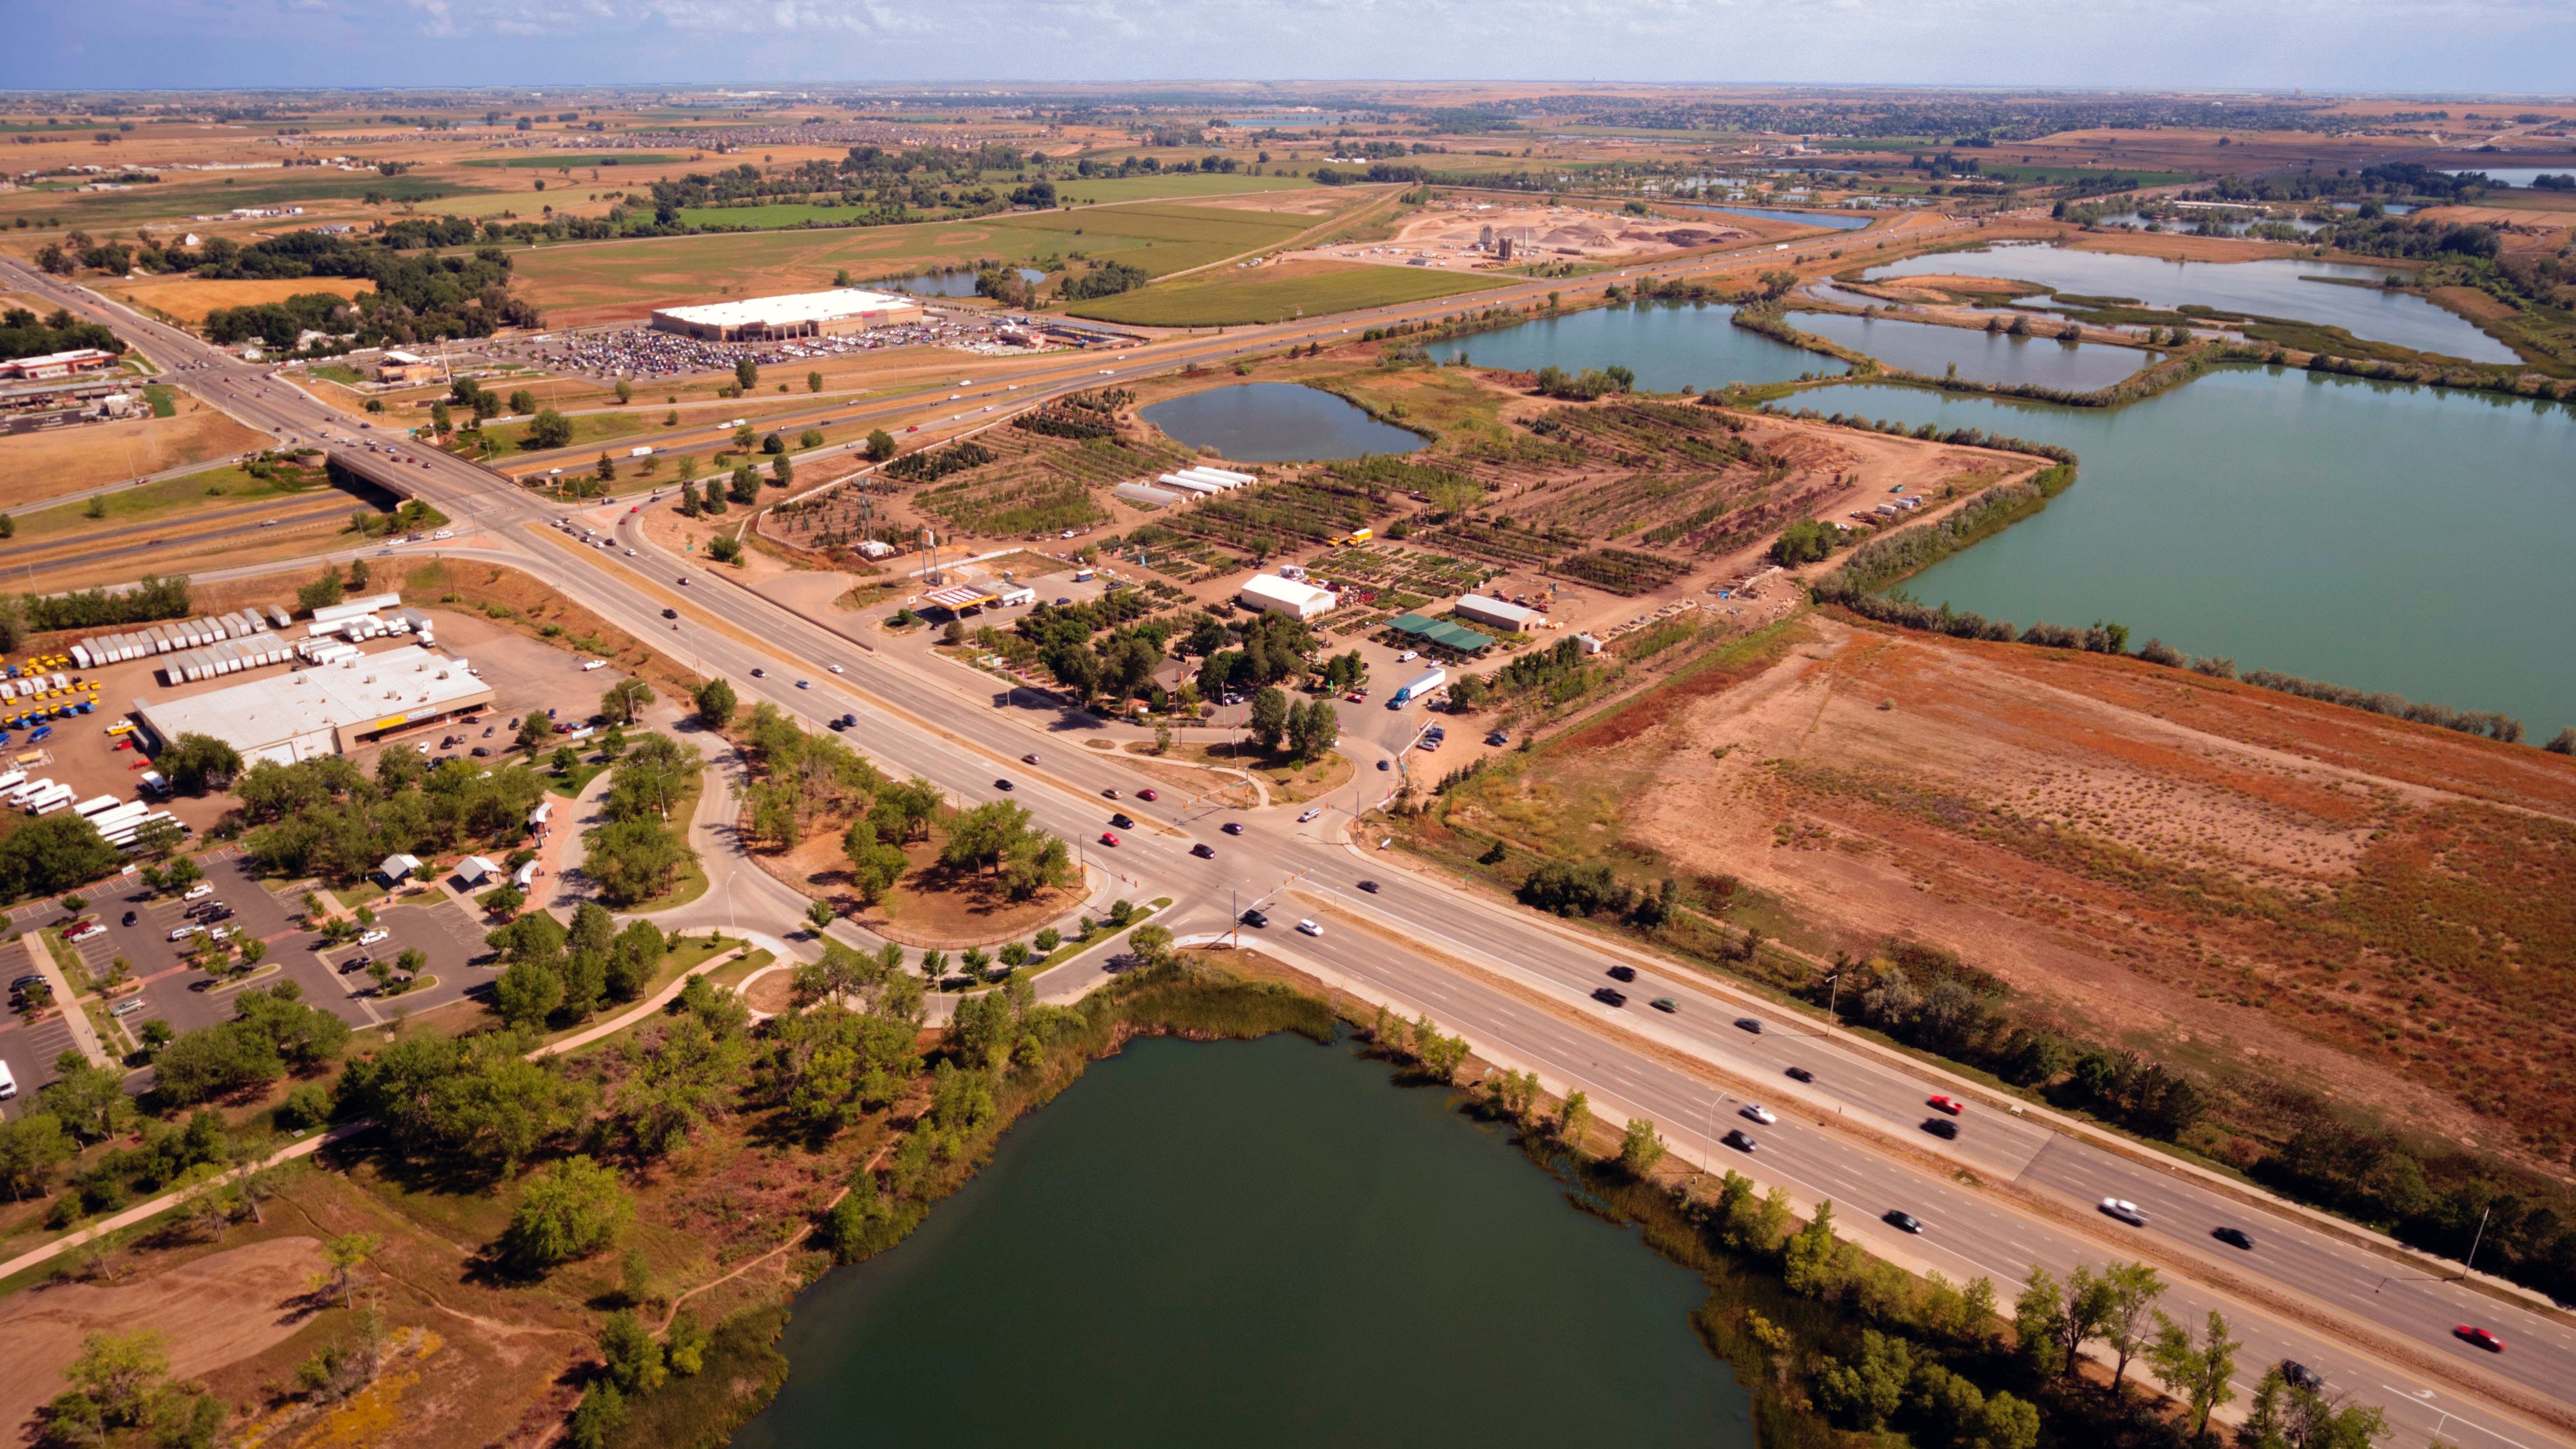 Aerial photography of an open road with cars near city and lake during daytime